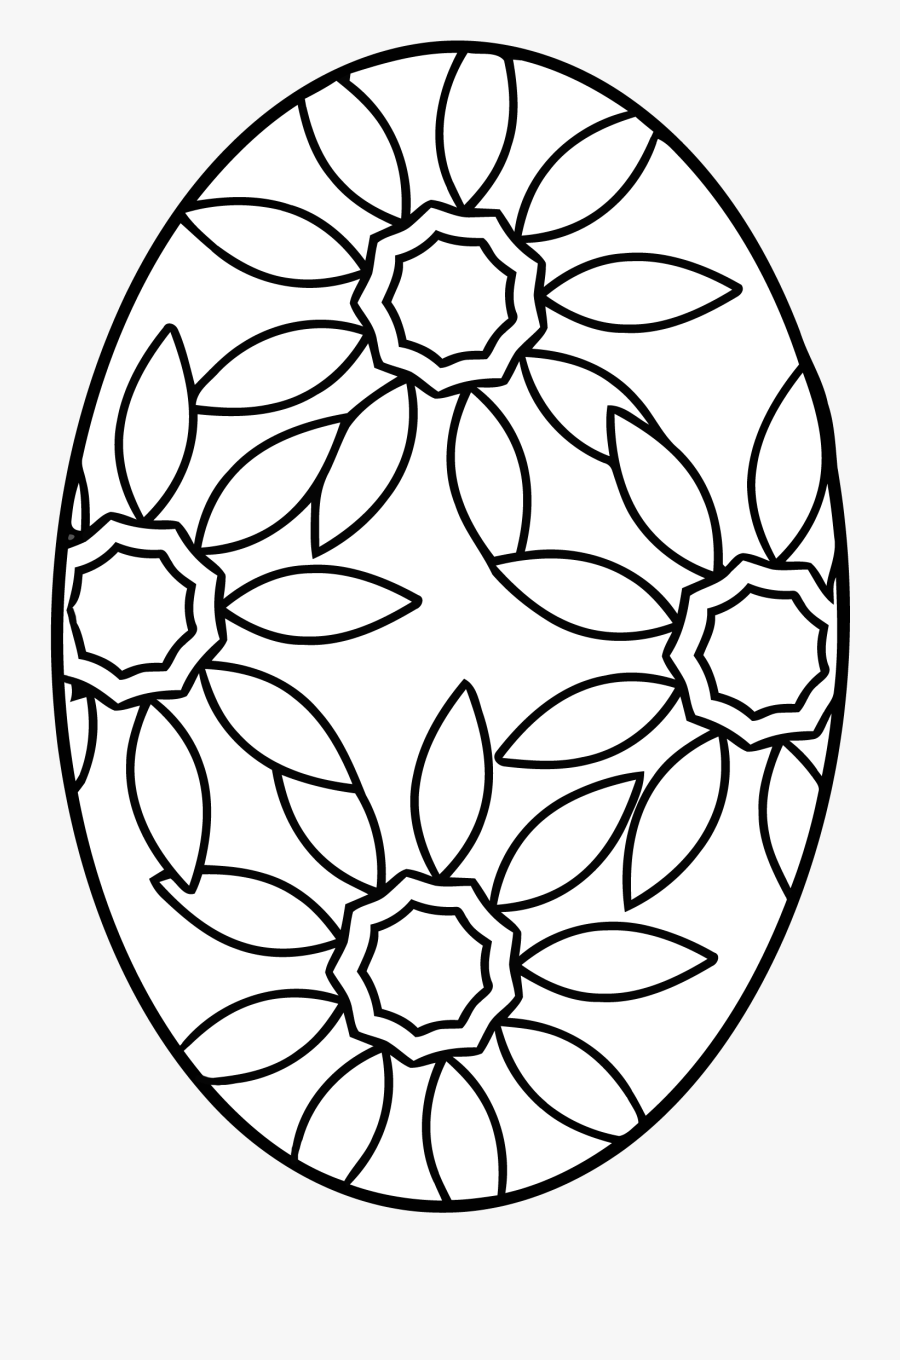 Easter Eggs Coloring Pages Egg Get Pages Easter Eggs - ตรา ร ร มุสลิม วิทยา ภูเก็ต, Transparent Clipart